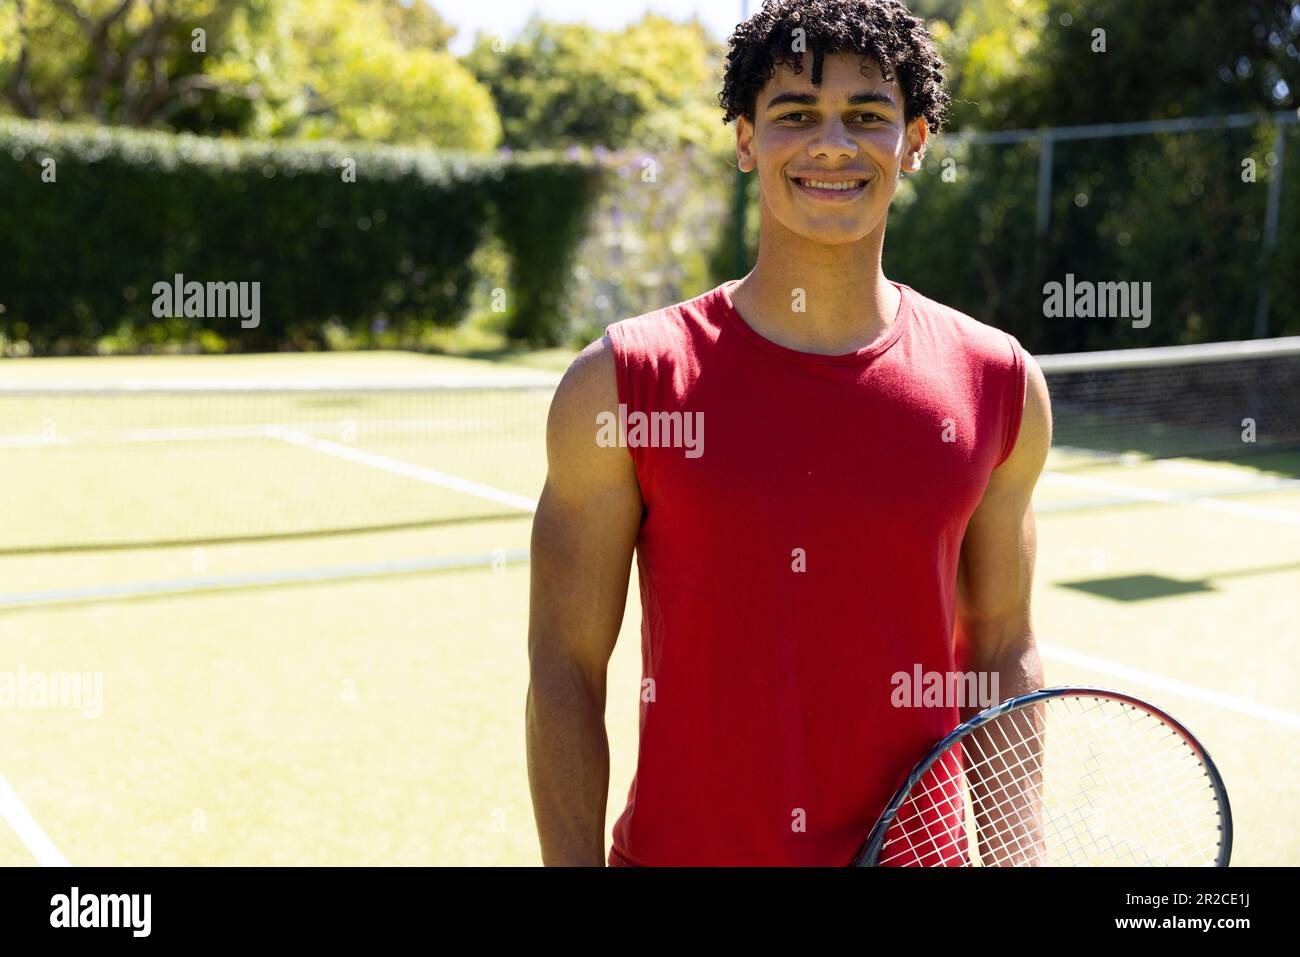 Portrait of smiling biracial fit man with tennis racket on sunny outdoor tennis court Stock Photo